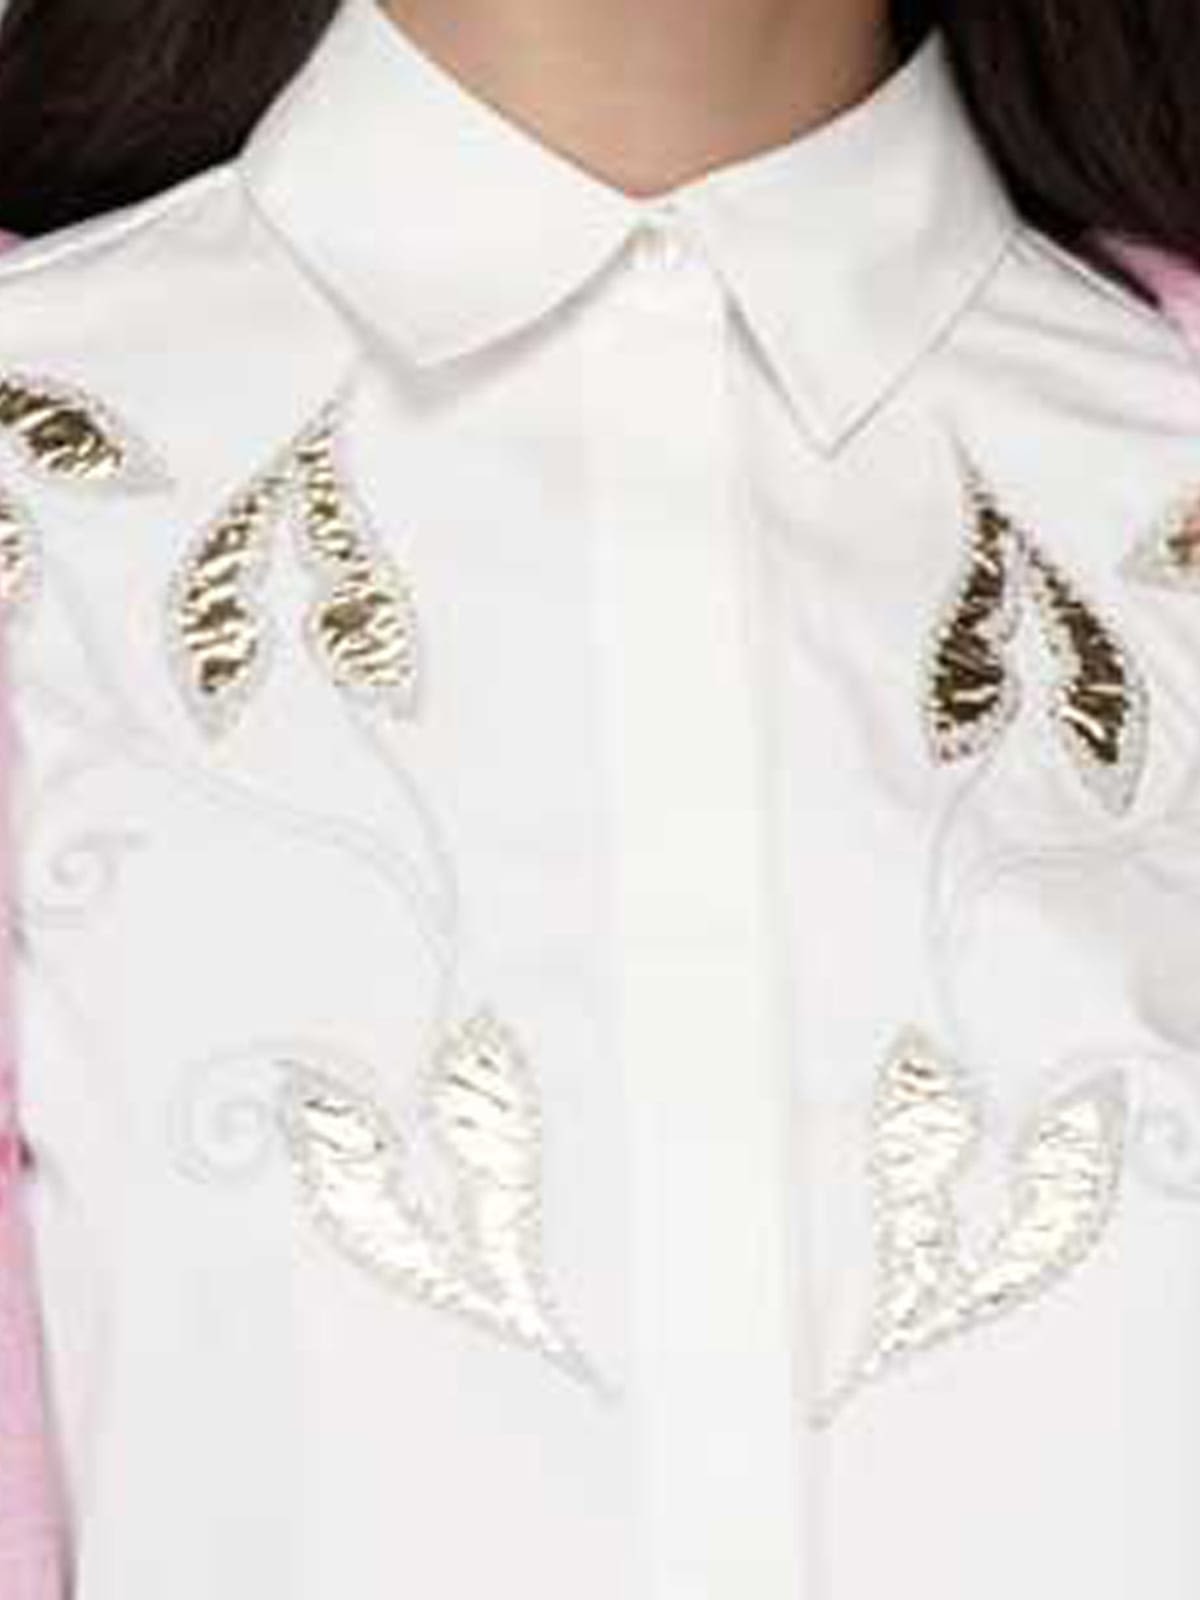 Alice popilin shirt in white with gold leaf embroidery